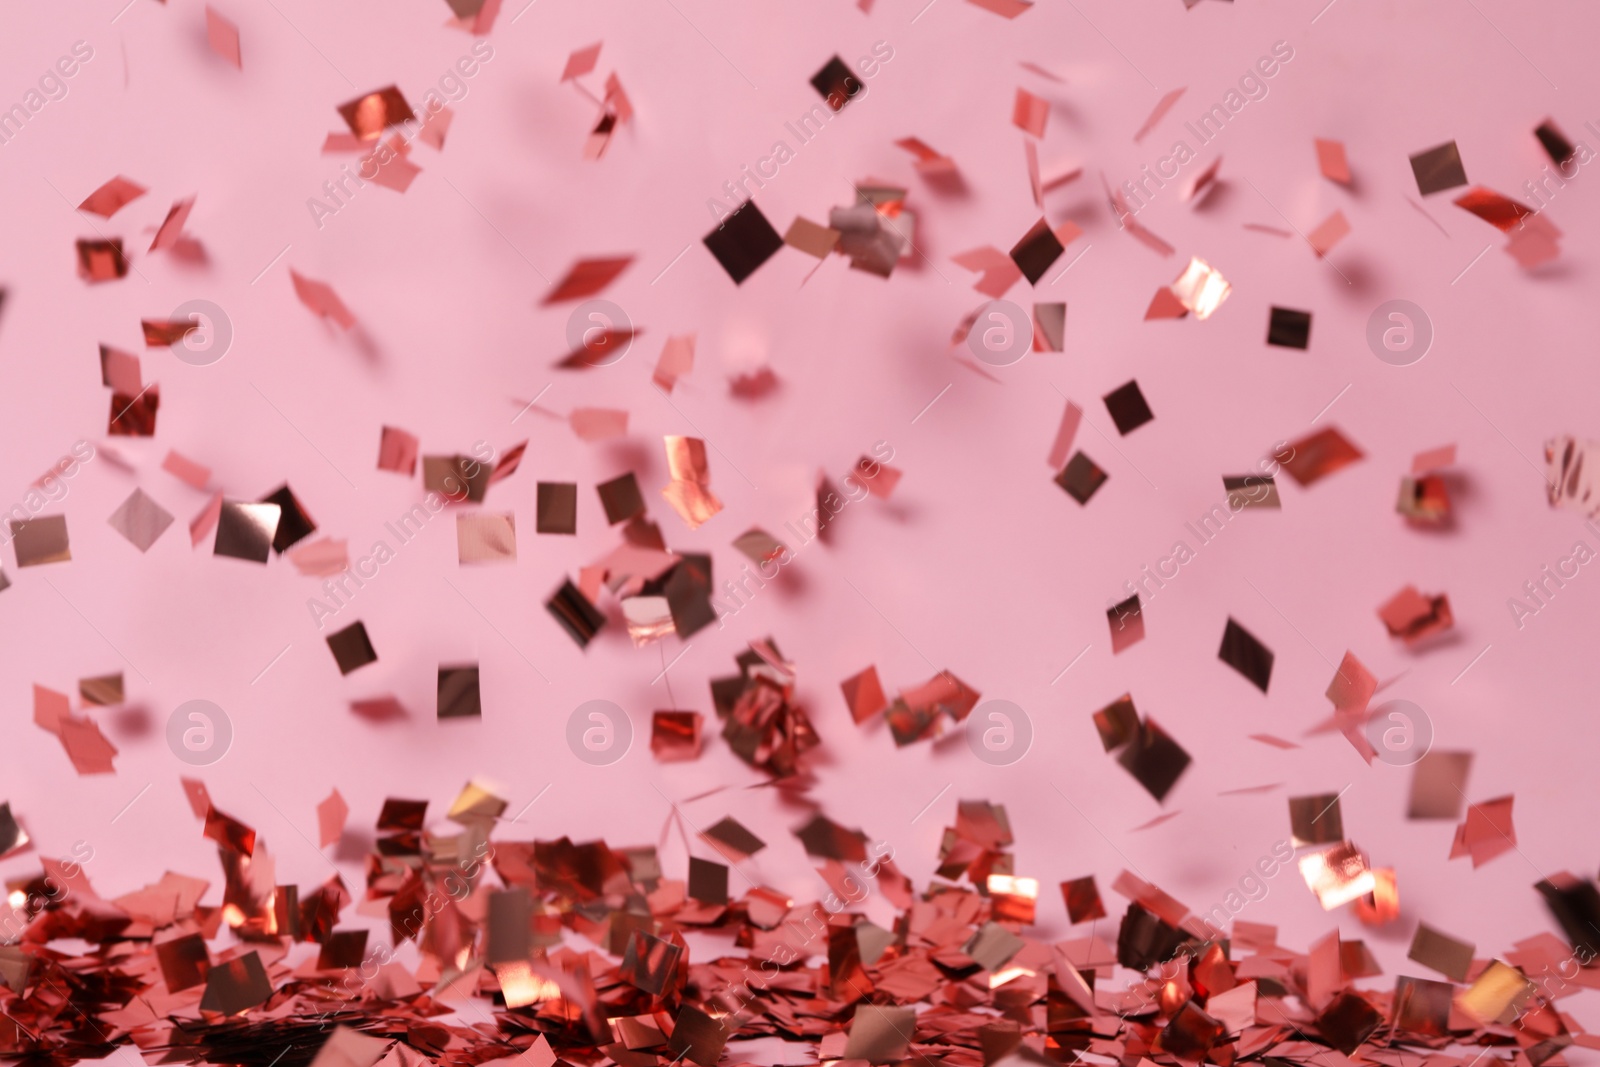 Photo of Shiny confetti falling down on pink background